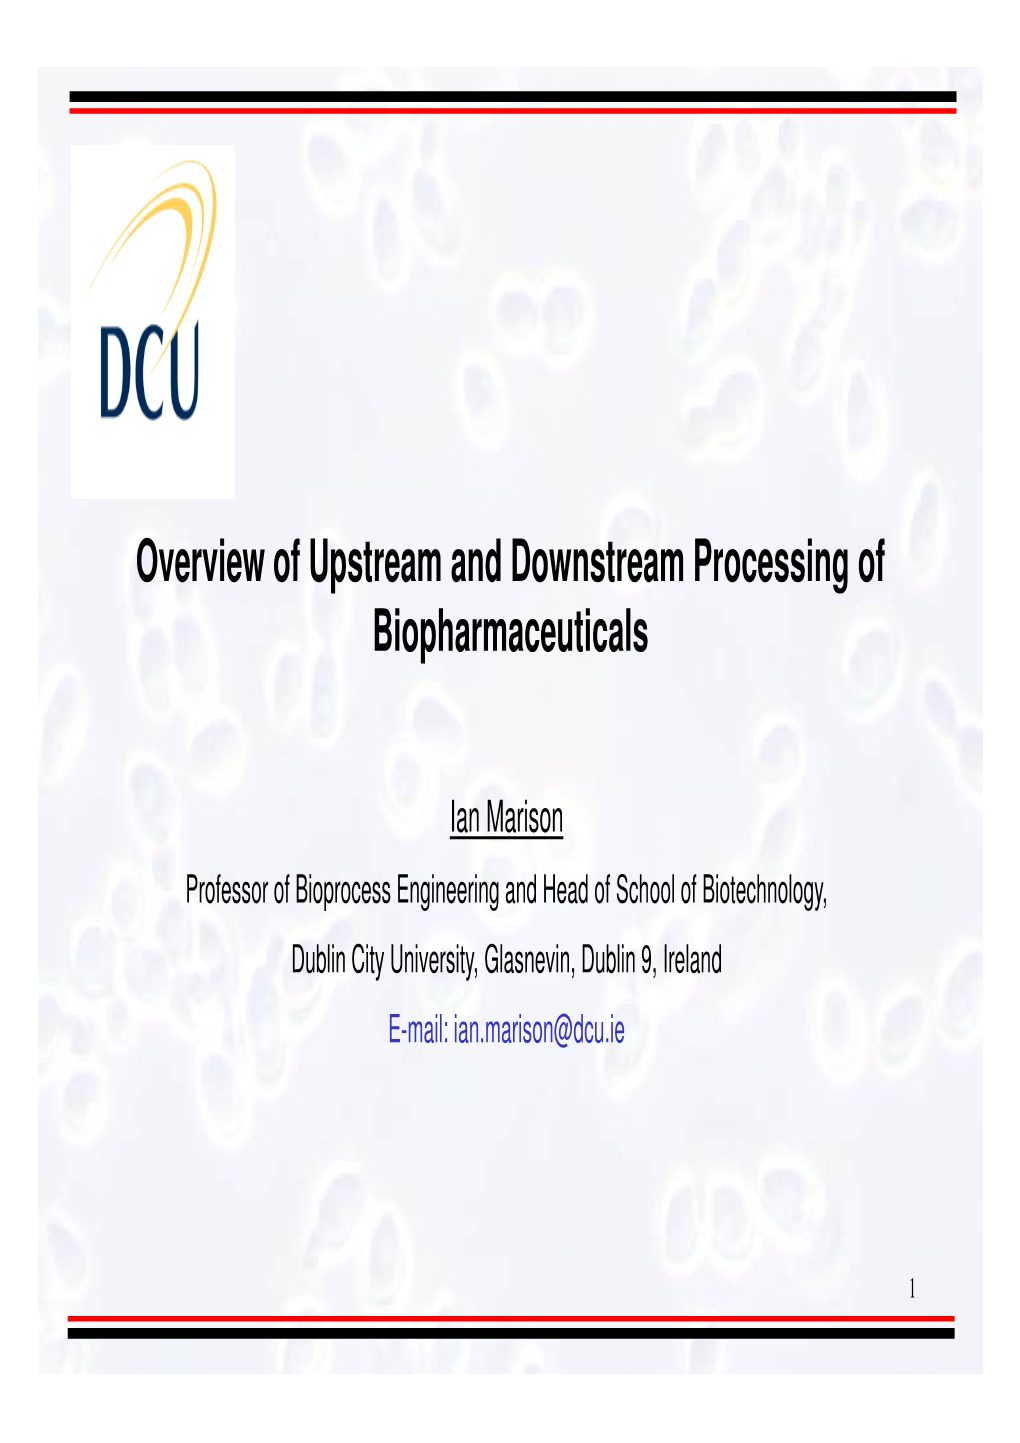 Overview of Upstream and Downstream Processing of Biopharmaceuticals